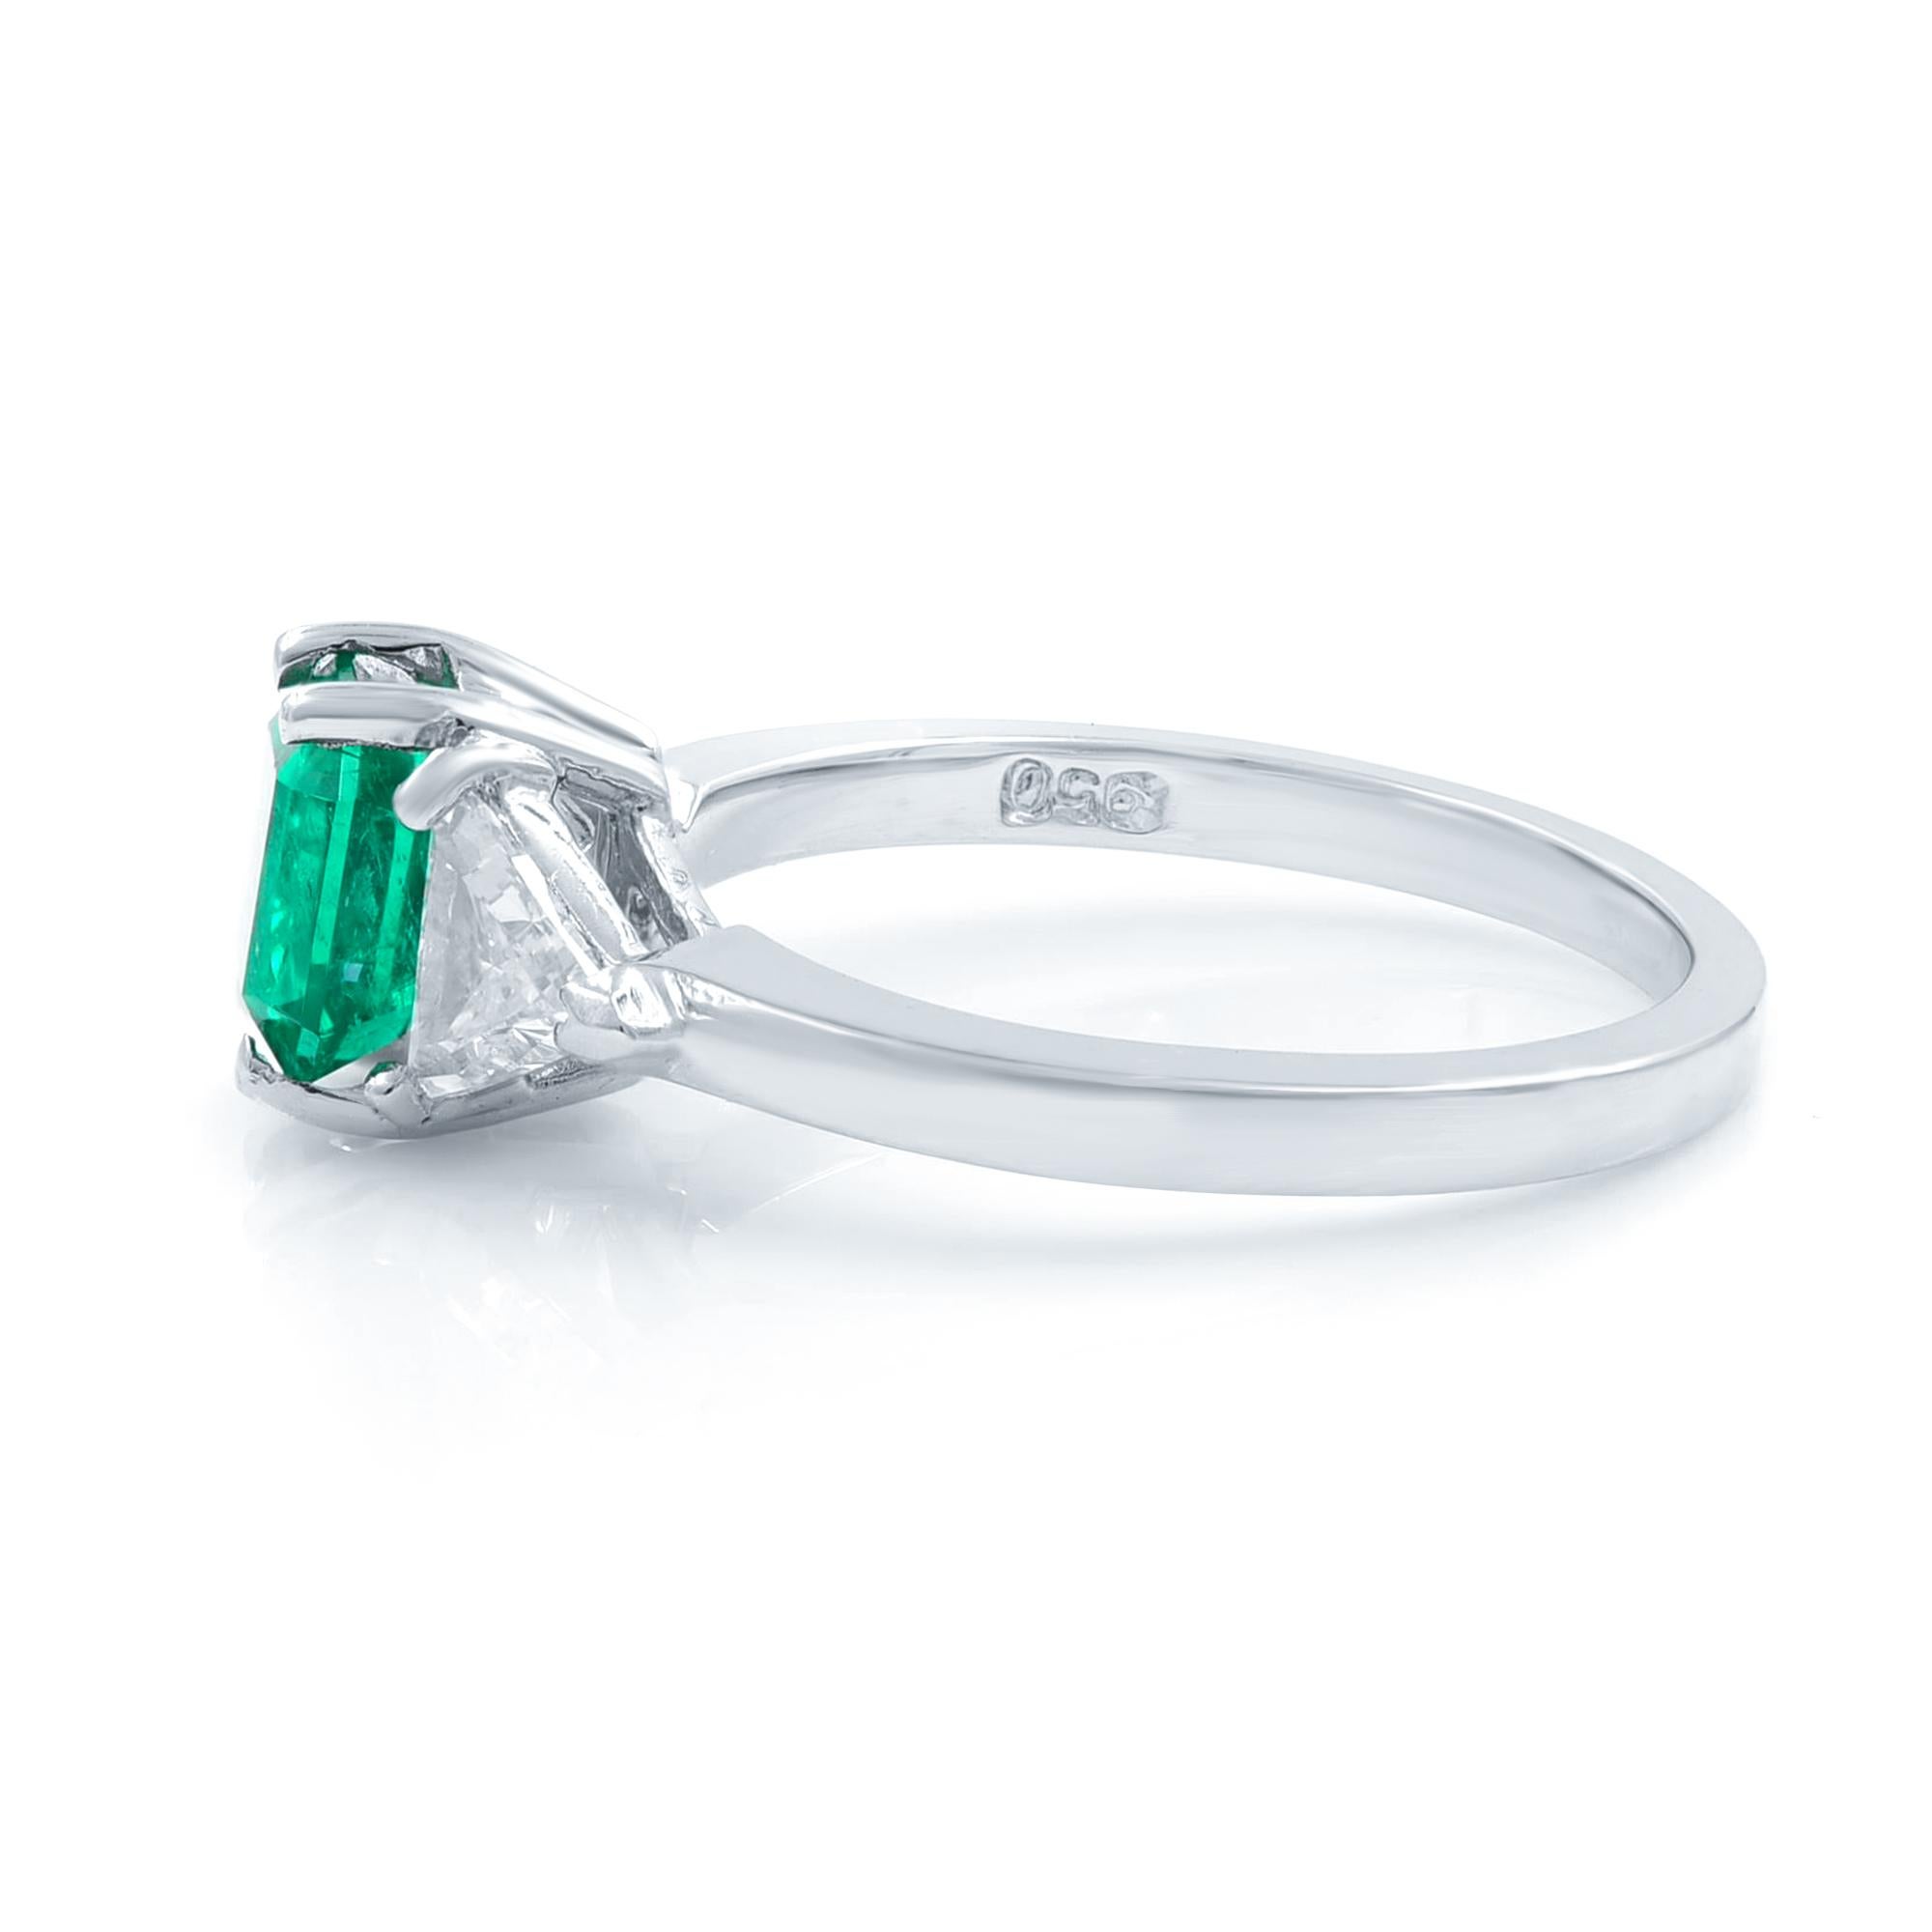 A bright vibrant crystalline green Colombian emerald with soft shouldered square emerald-cut, radiates between sparkling white trillion-cut diamonds in this classic estate jewel rendered in lustrous platinum. Timeless. Center Emerald: 1.80cts. Side